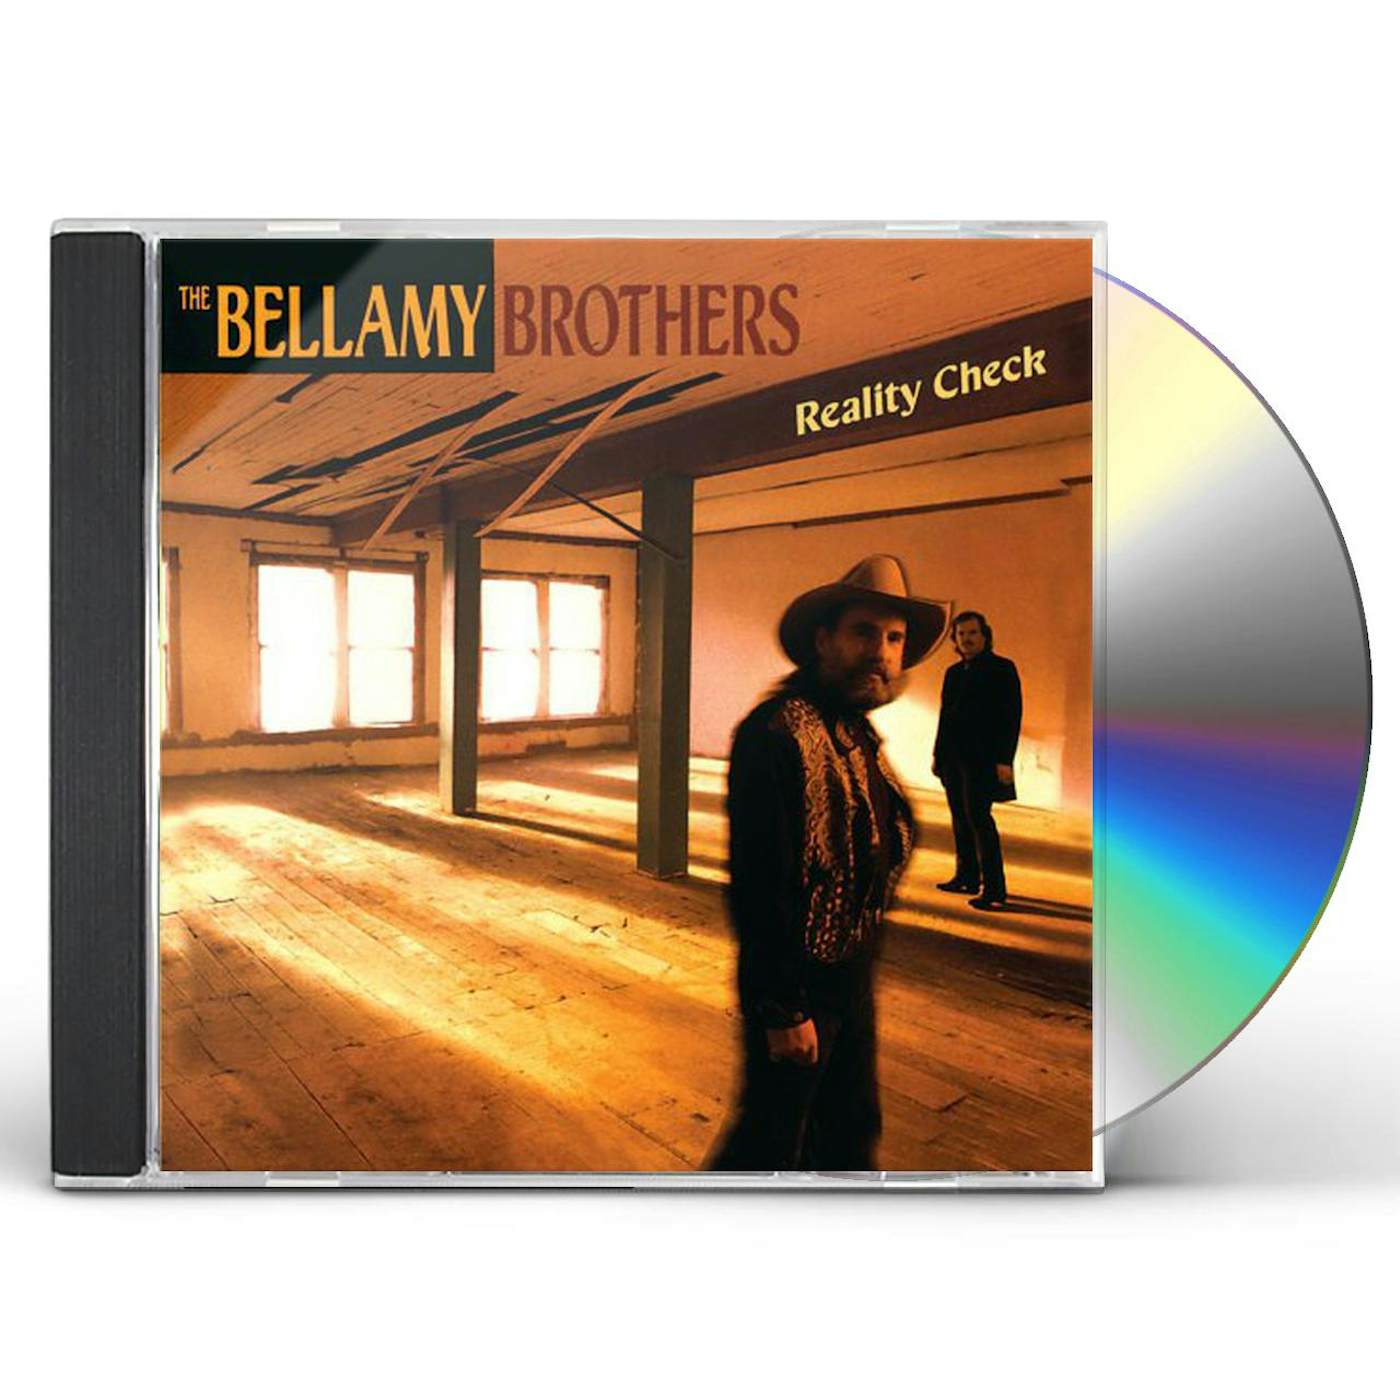 The Bellamy Brothers REALITY CHECK CD